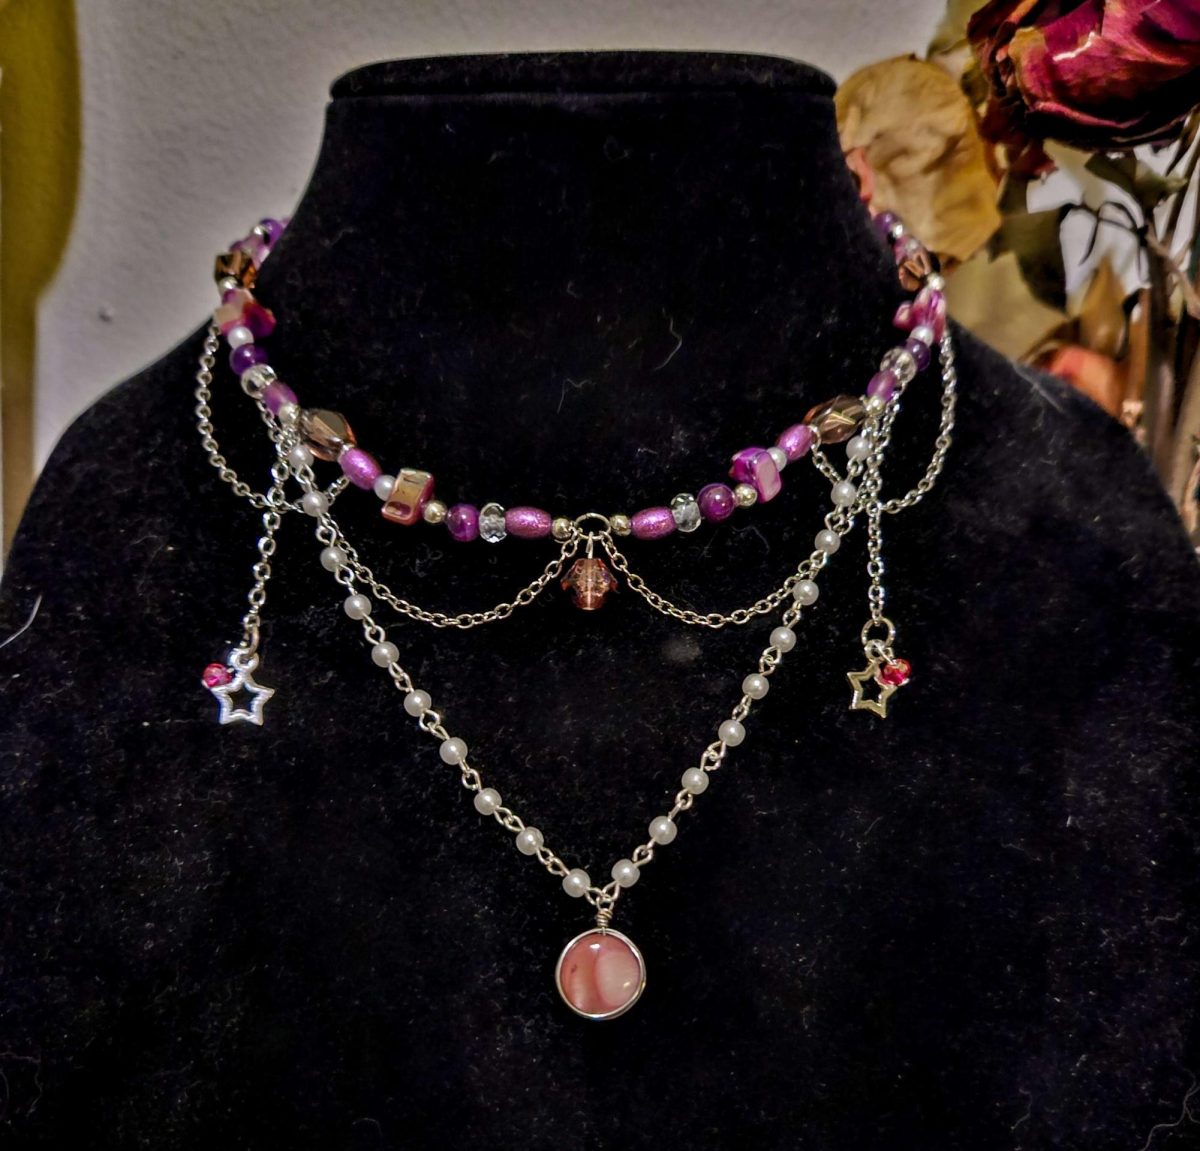 One of Owens complex, multi-stringed necklaces